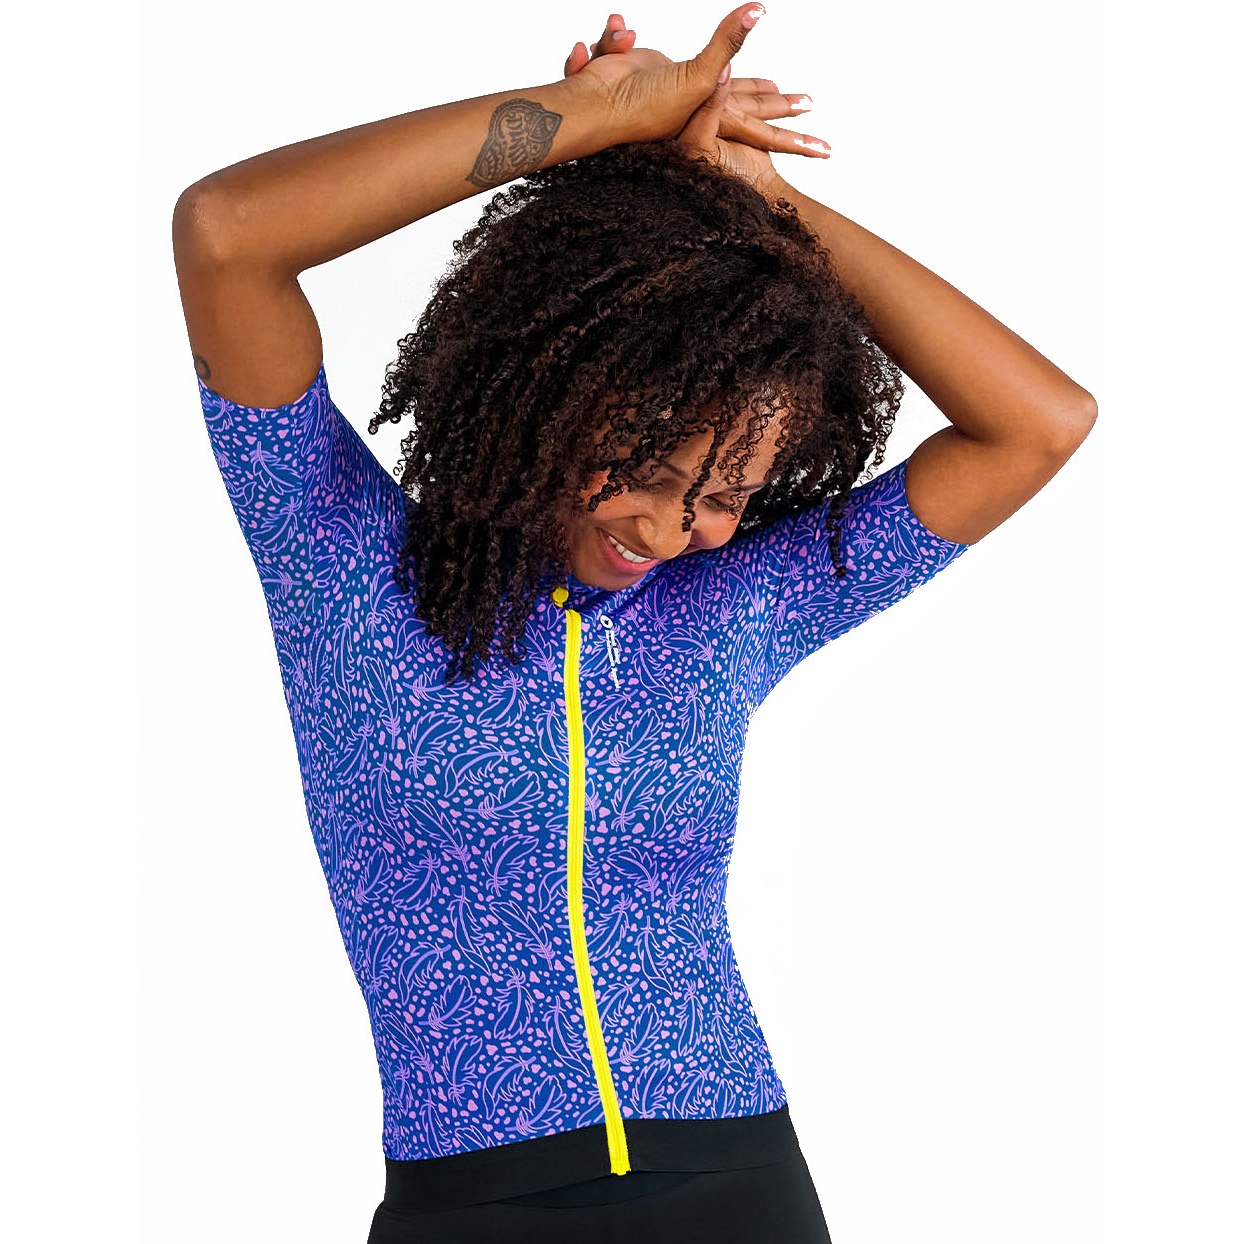 Image of Black Sheep Cycling WMN Integrated Short Sleeve Jersey Women - Blue Birds of Feather